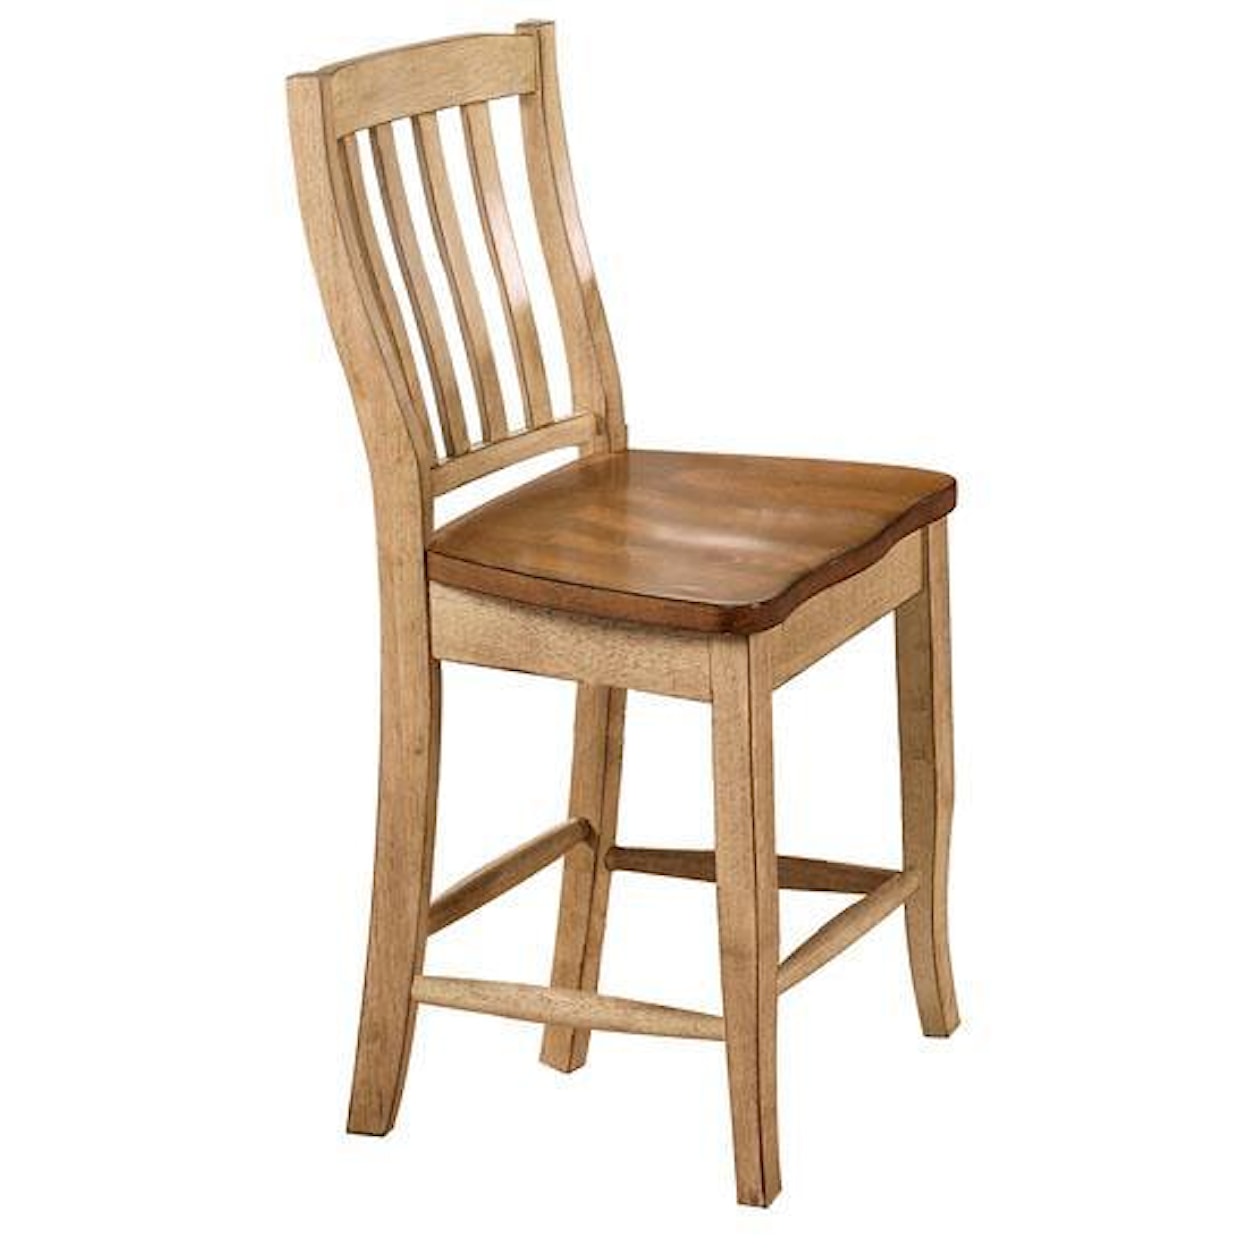 Winners Only Quails Run 7 Piece Tall Table and Barstool Set